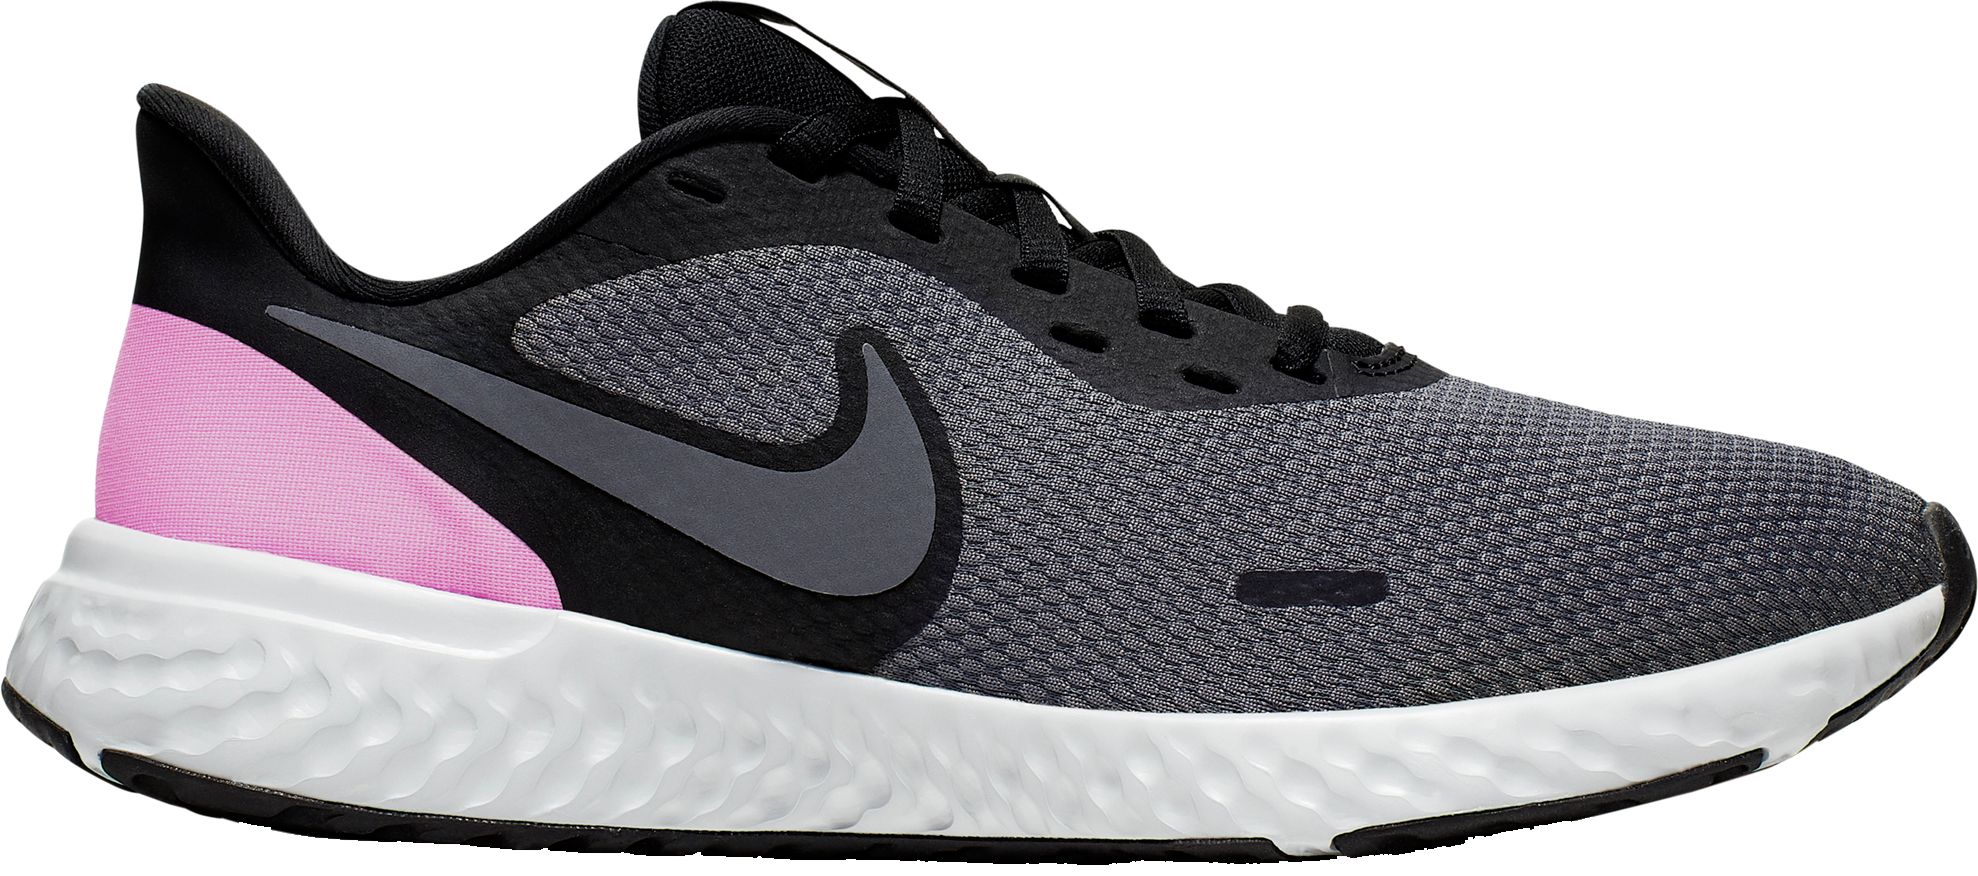 nike women's revolution 5 competition running shoes